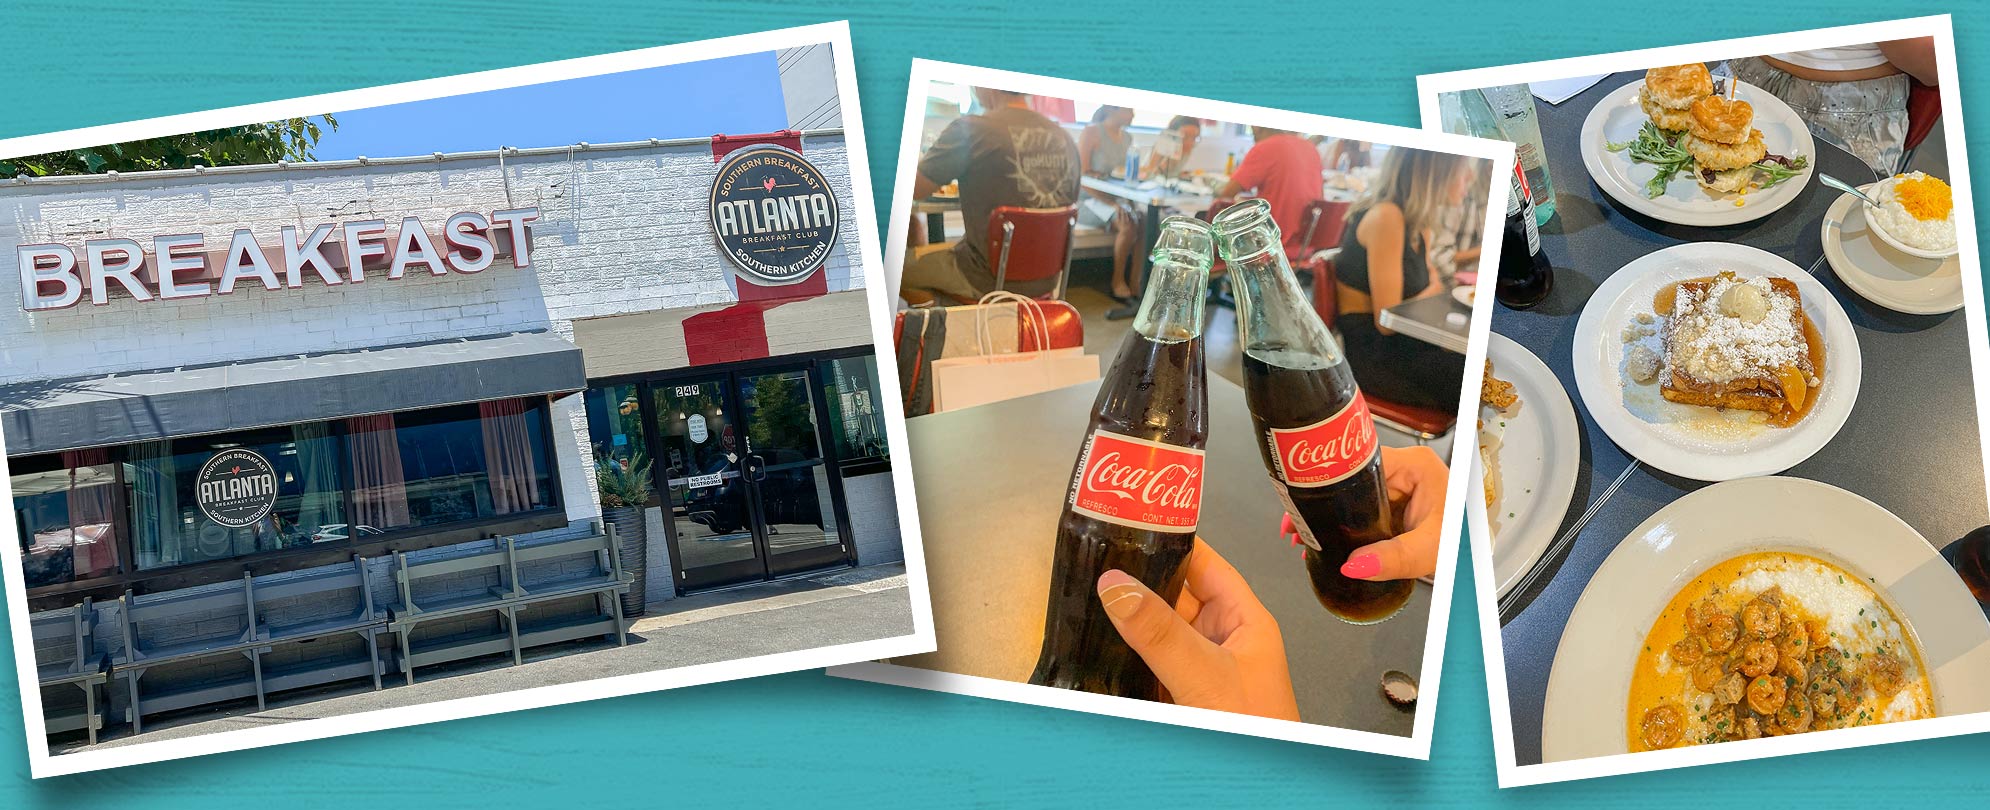 Three snapshots on a teal background showing the exterior of Atlanta Breakfast Club building, two hands clinking together old-fashioned Coca-Cola bottles, and a gray table with plates of breakfast meals.